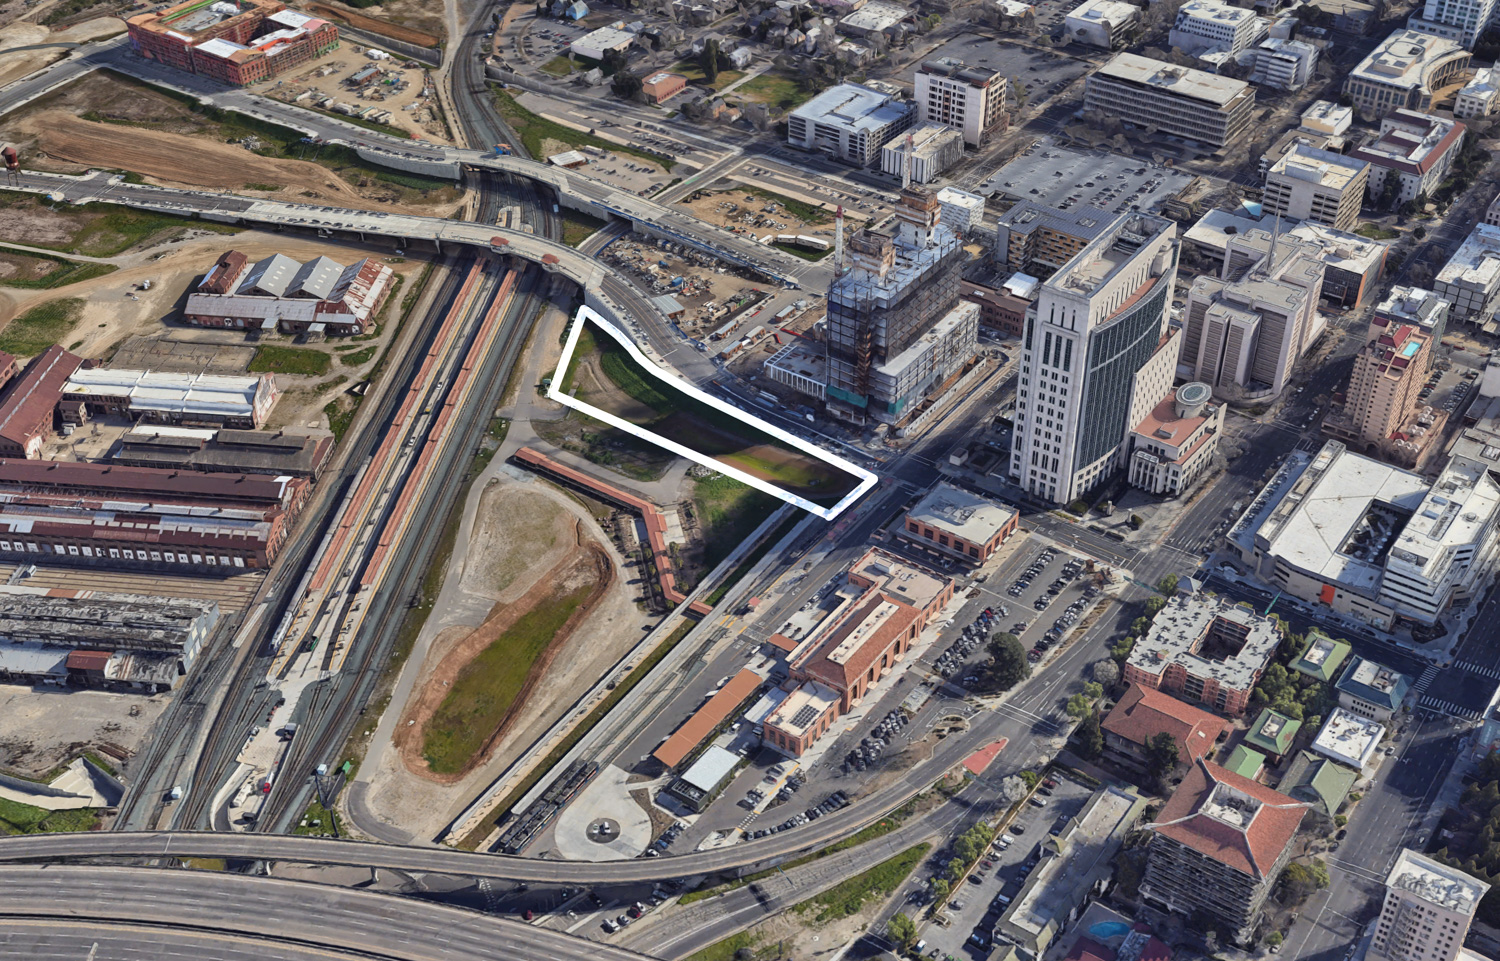 642 5th Street outlined approximately by YIMBY, image via Google Satellite